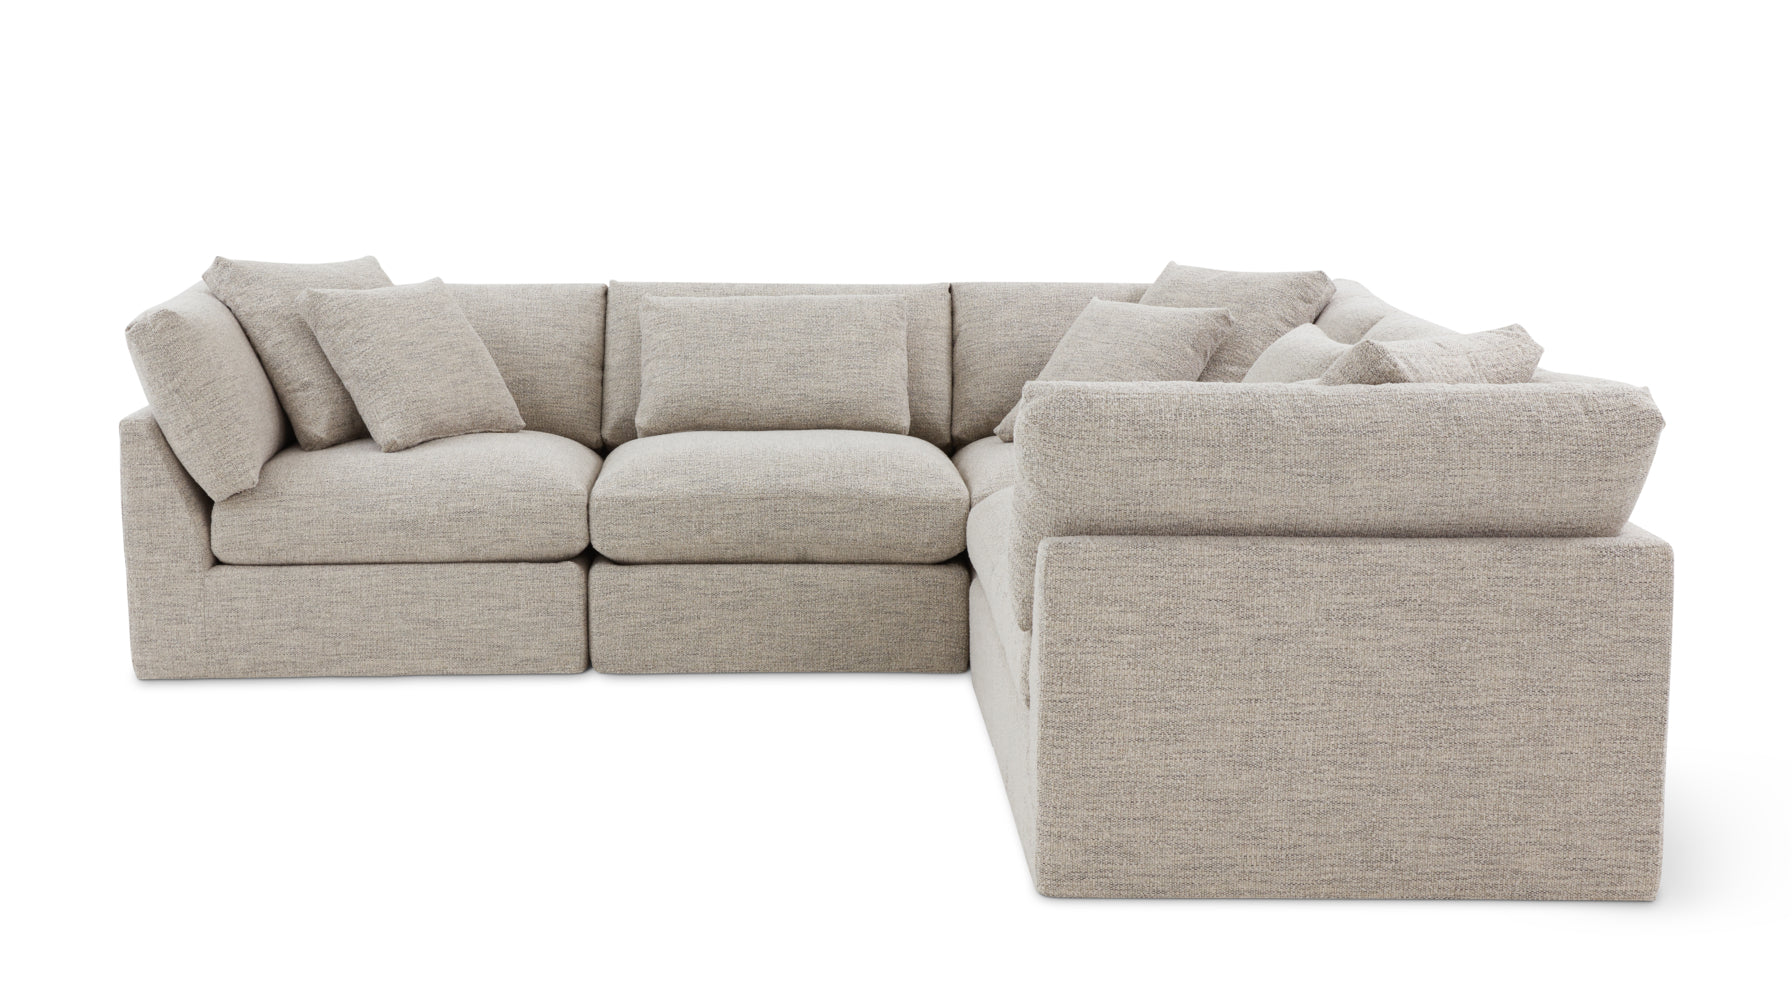 Get Together™ 5-Piece Modular Sectional Closed, Large, Oatmeal - Image 1